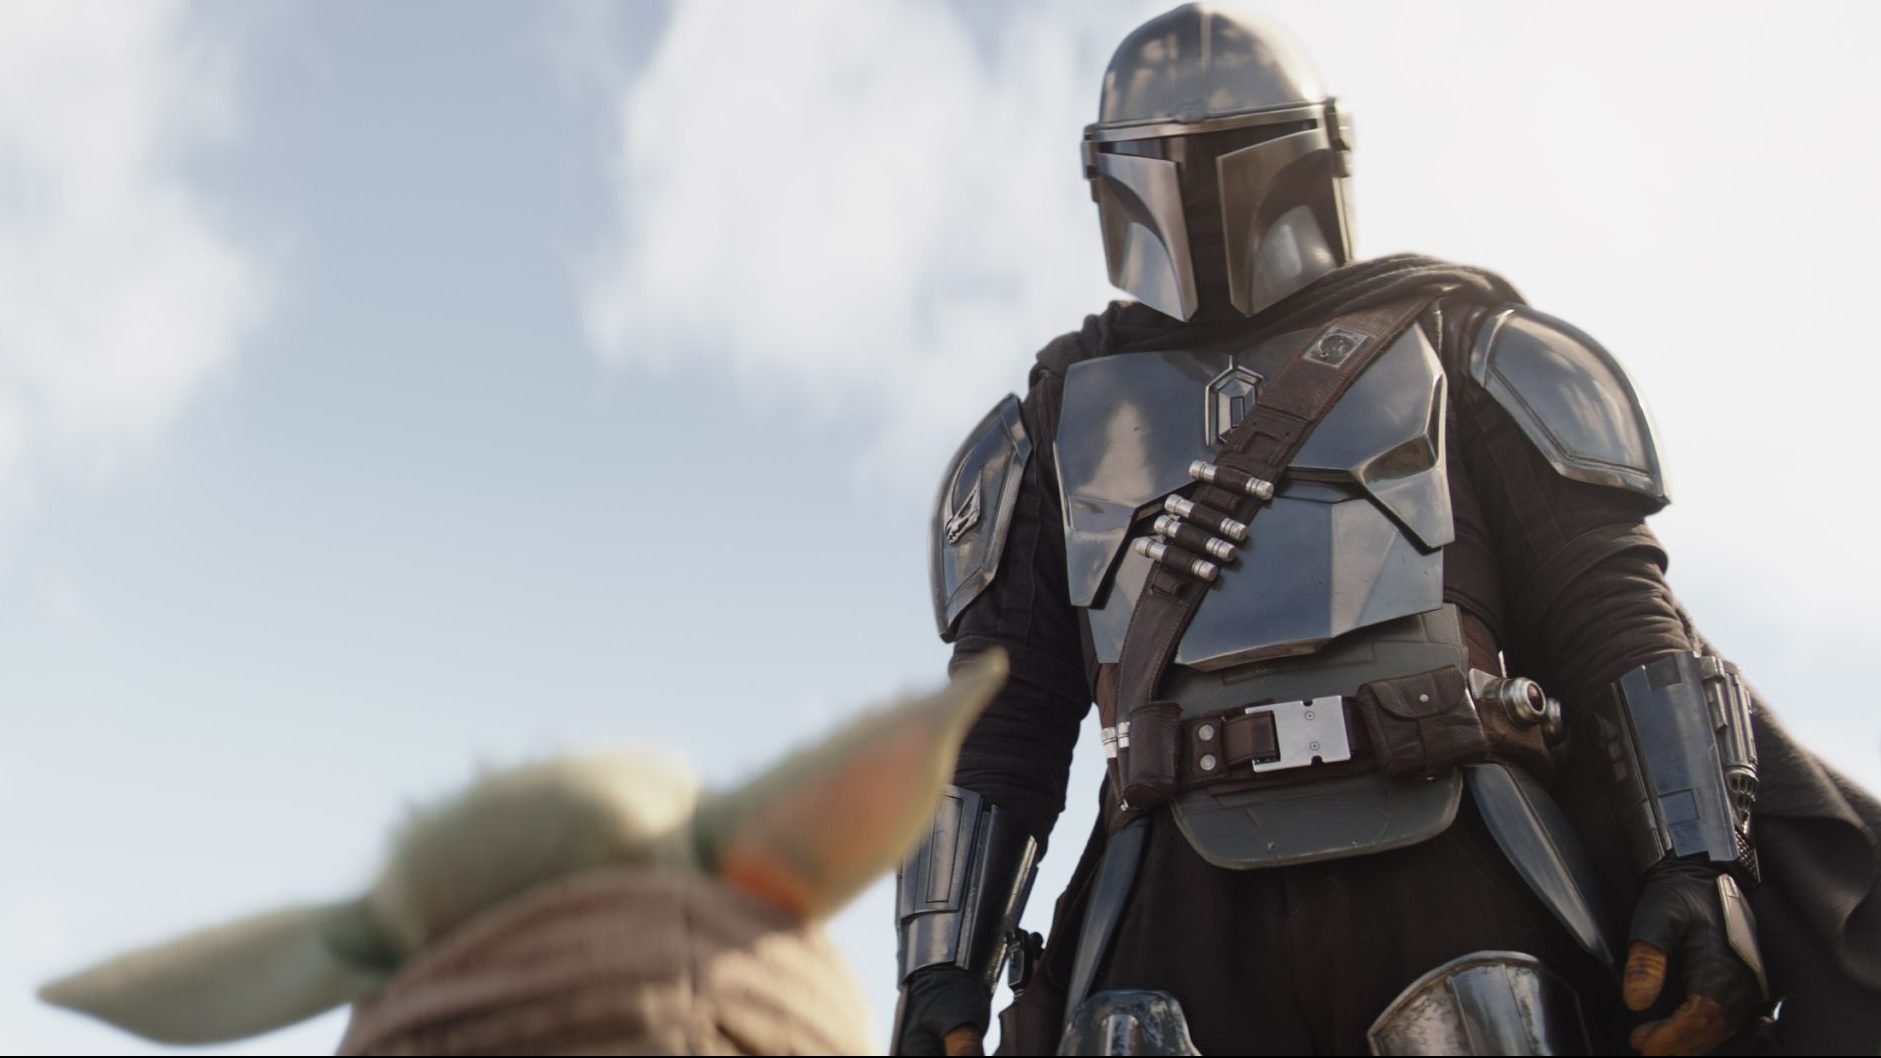 The Mandalorian Season 3 Cast: Every Actor Confirmed & Rumored to Appear